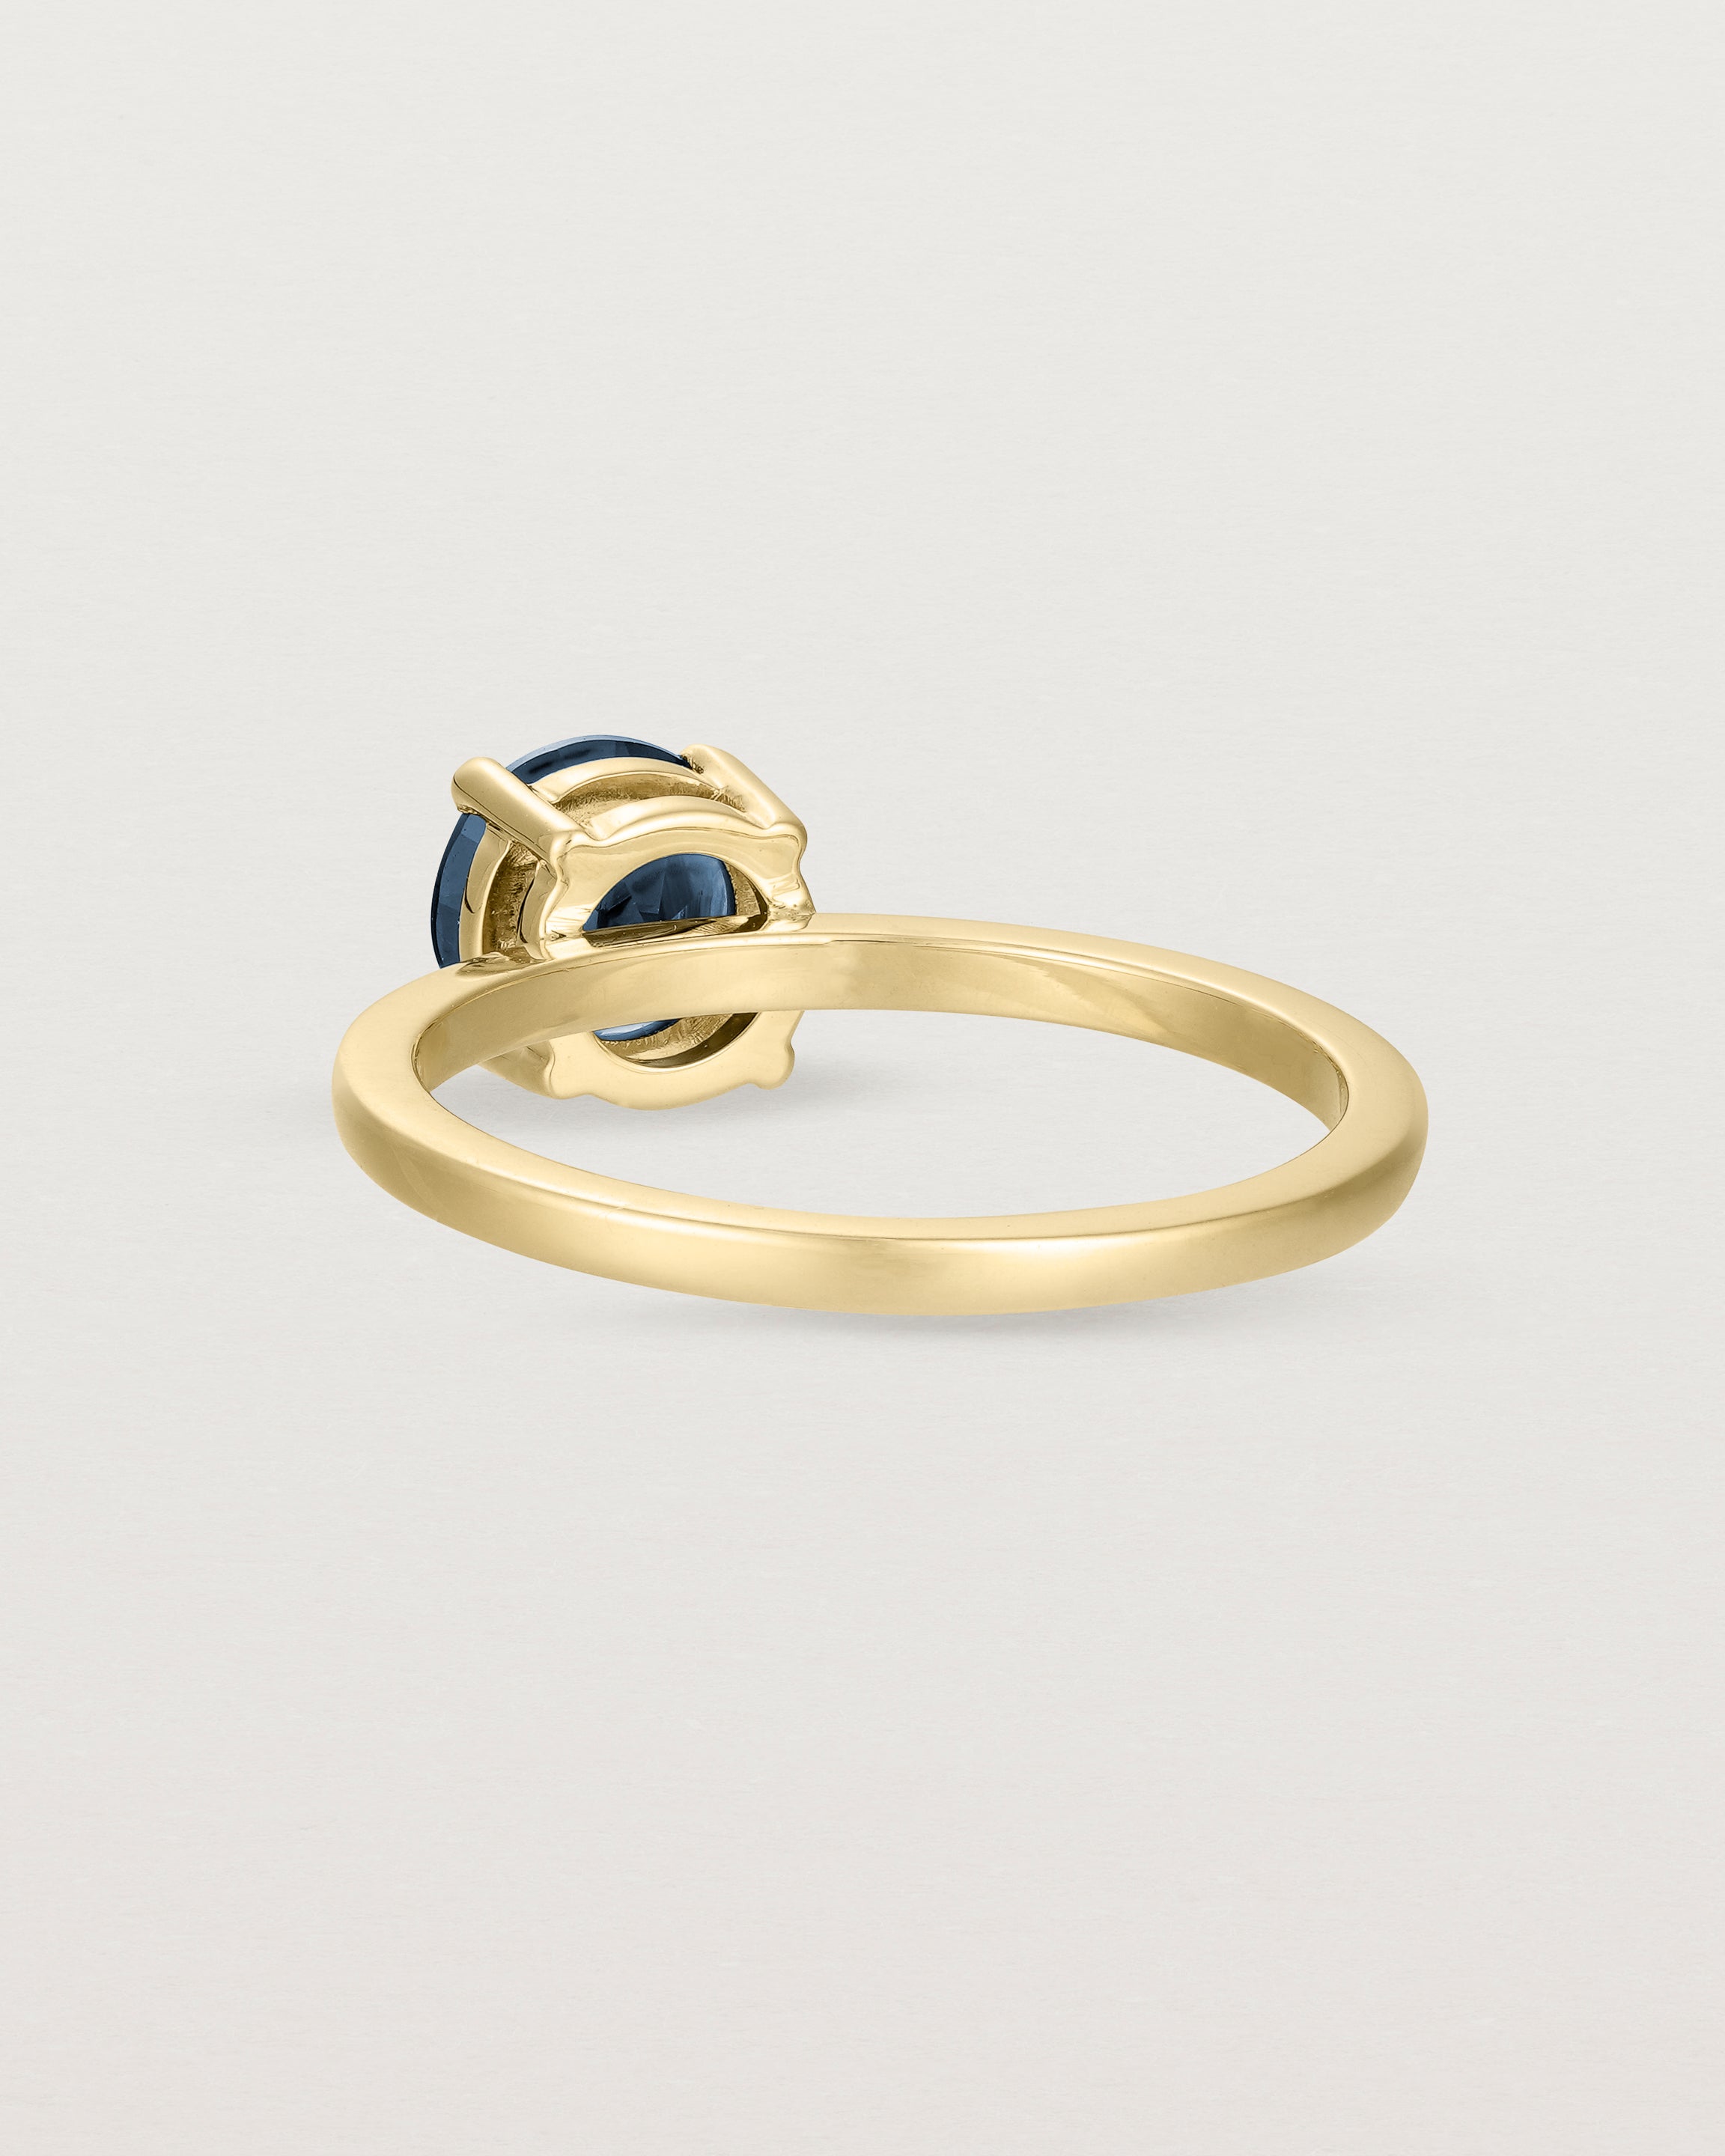 Back view of the Petite Una Round Solitaire | Australian Sapphire | Yellow Gold.